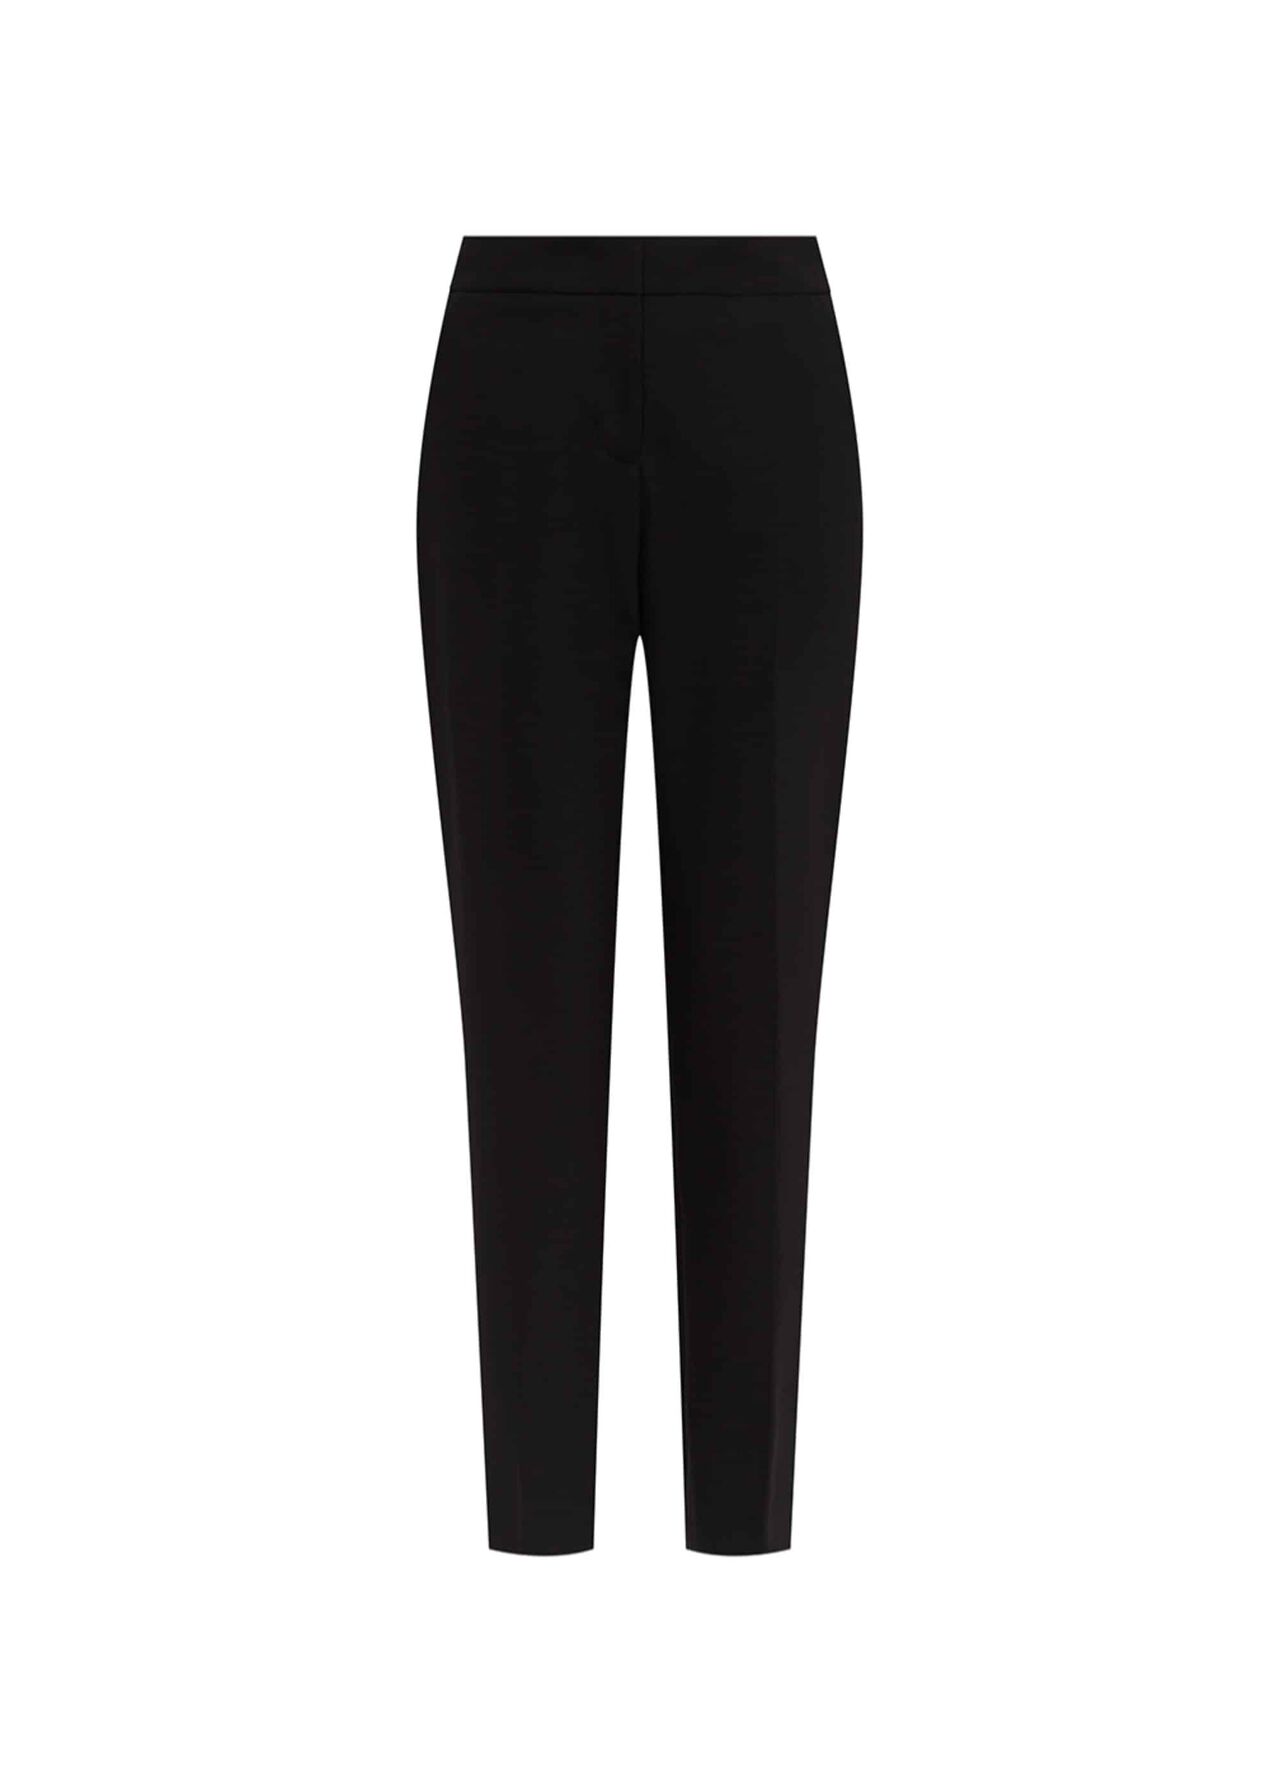 Petite Gael Wool Blend Trouser With Stretch, Black, hi-res